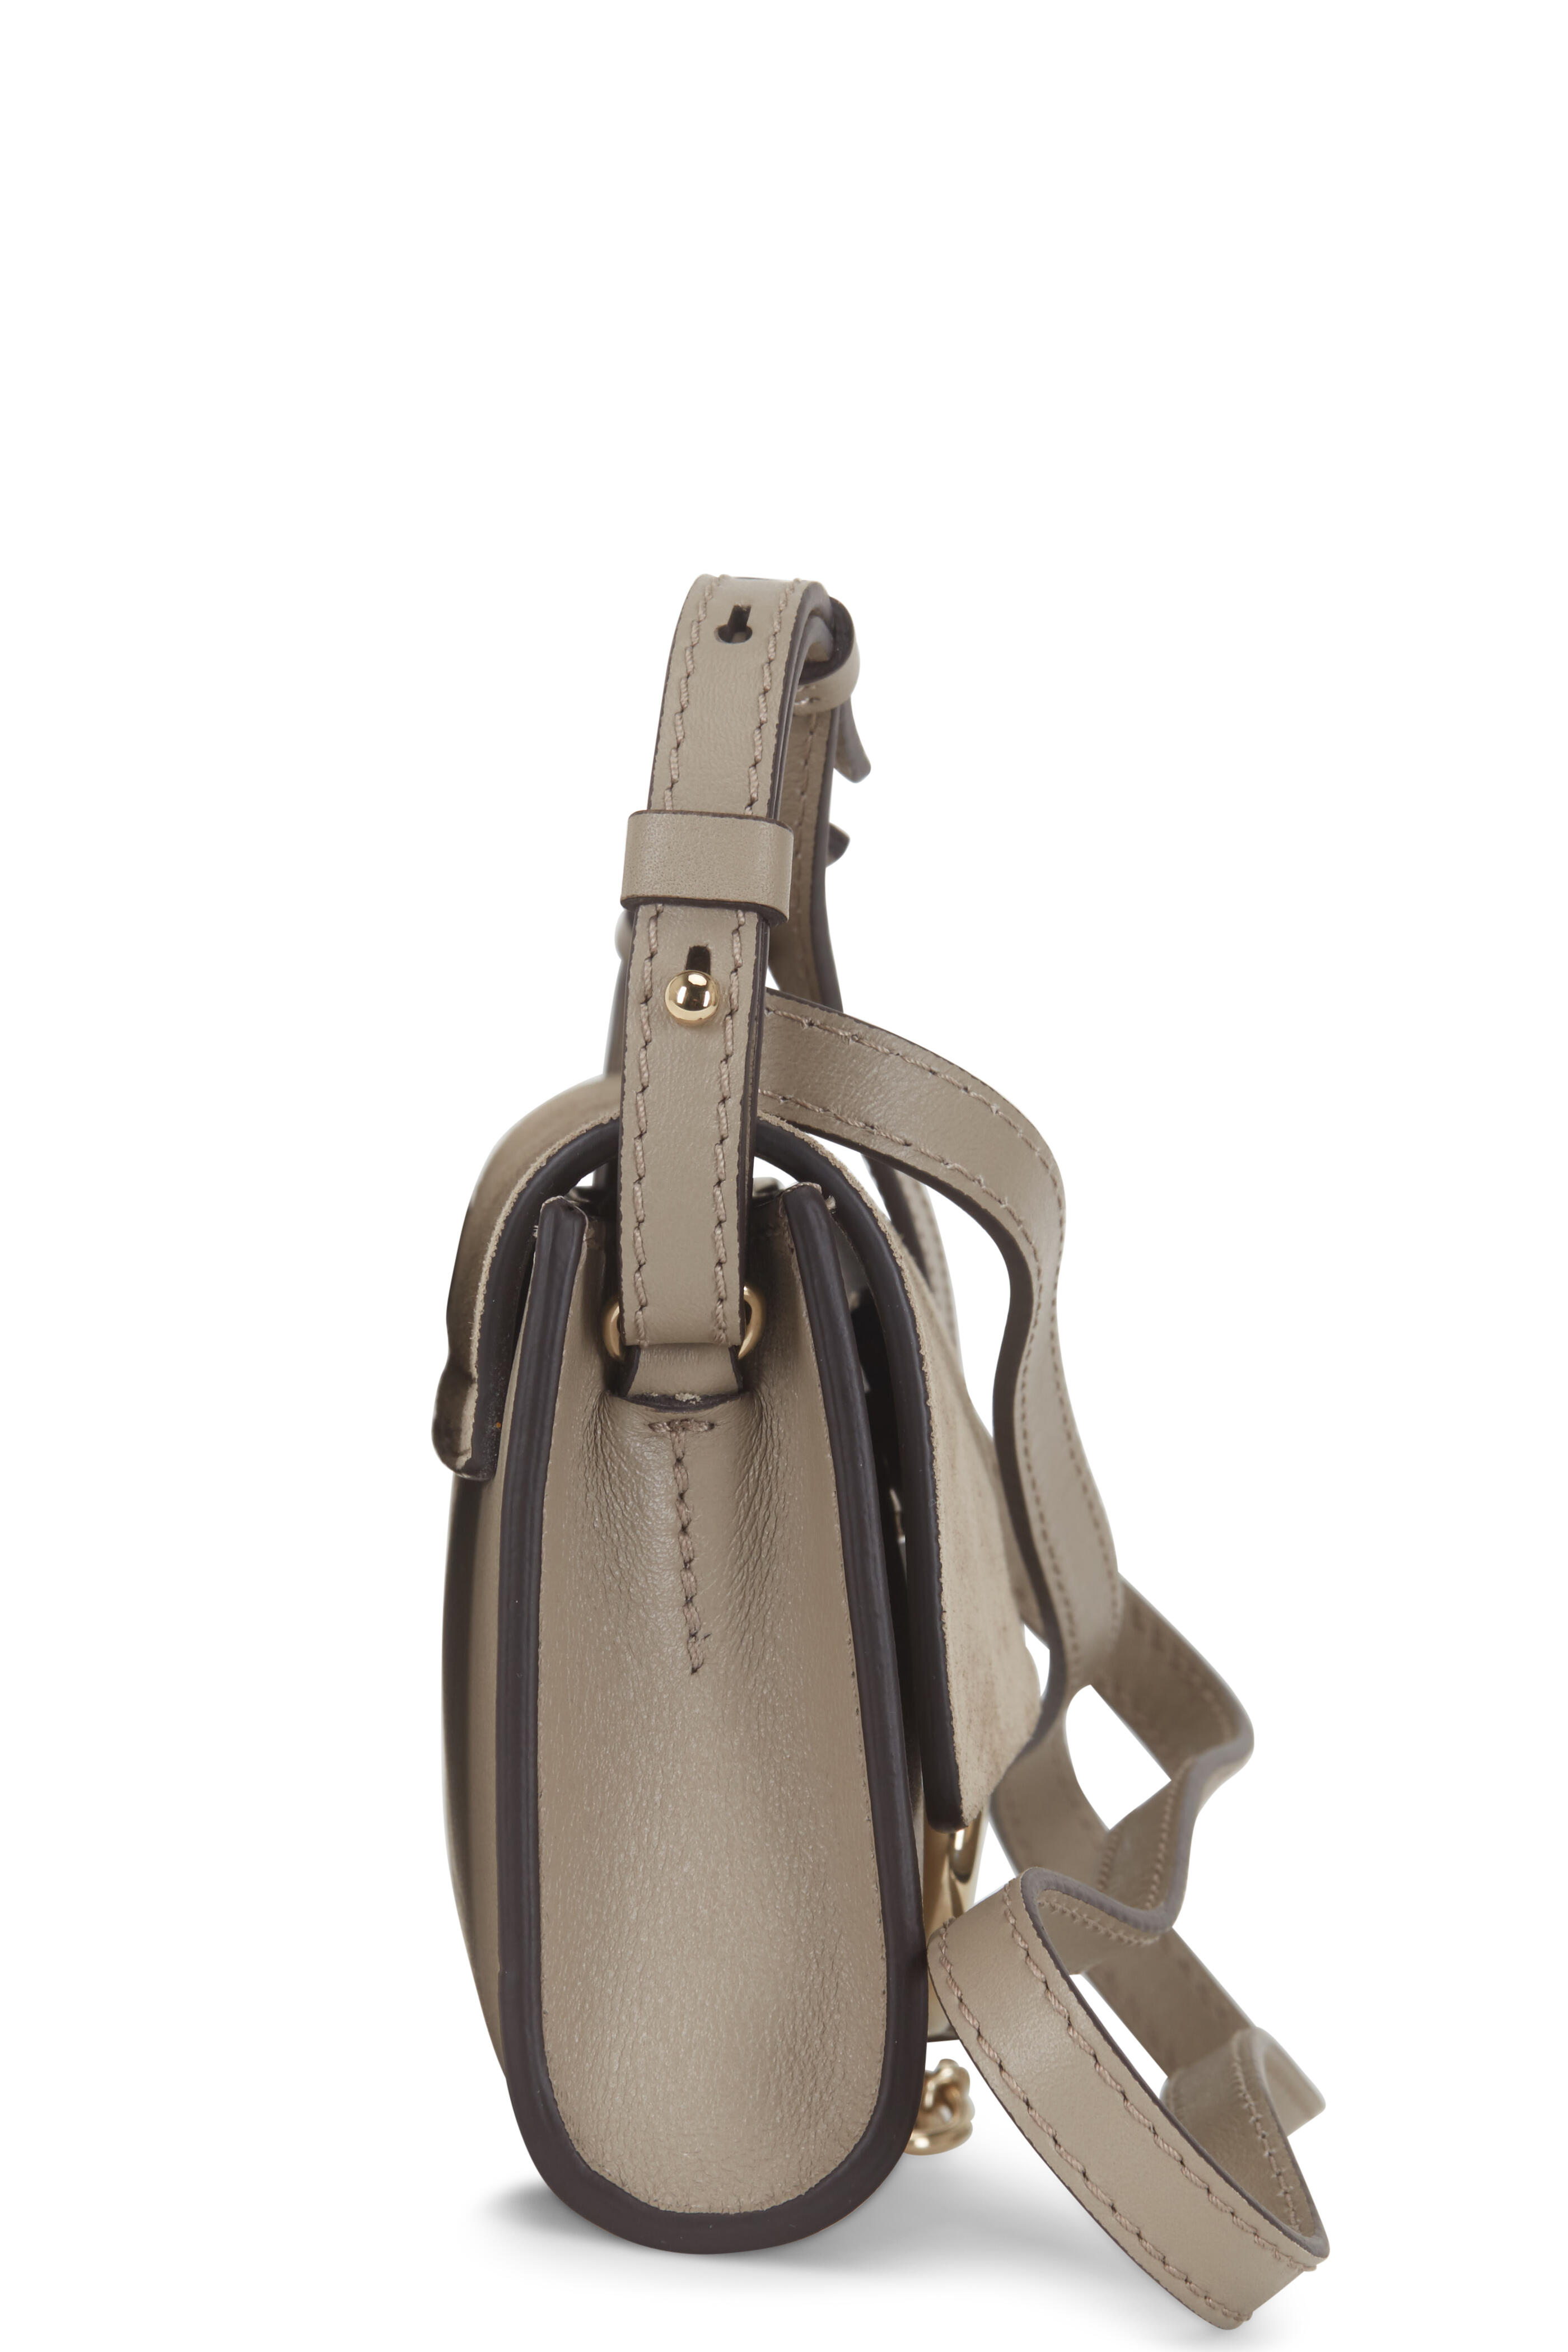 CHLOE Mini Faye Backpack in Tan Calfskin with Removable Strap